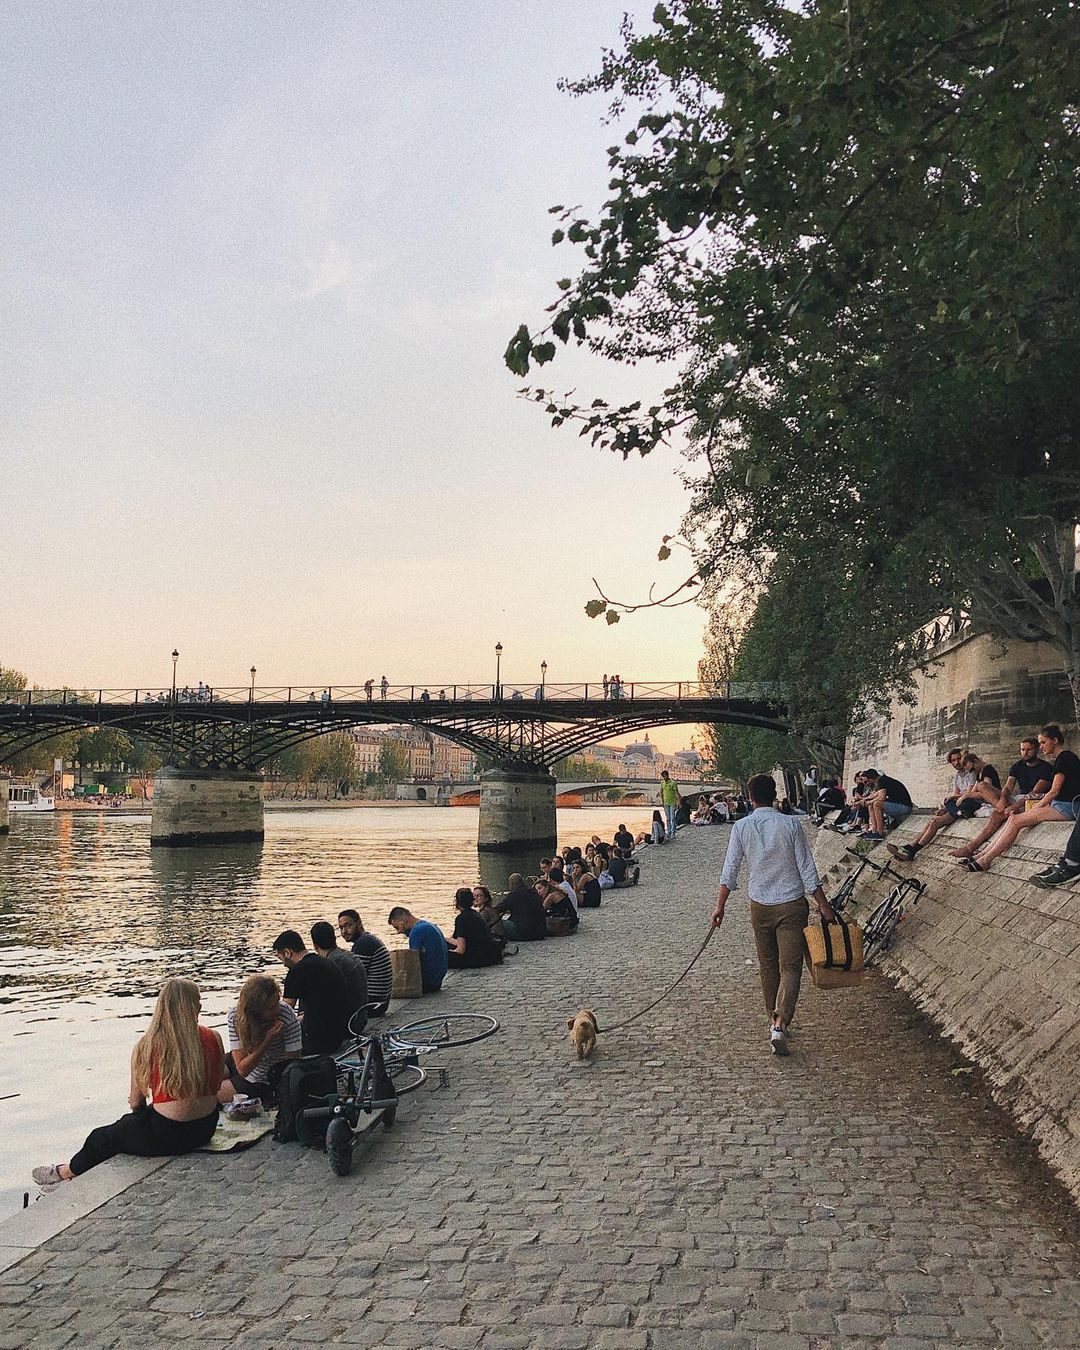 Groups of couples and friends gather for a break along the Seine